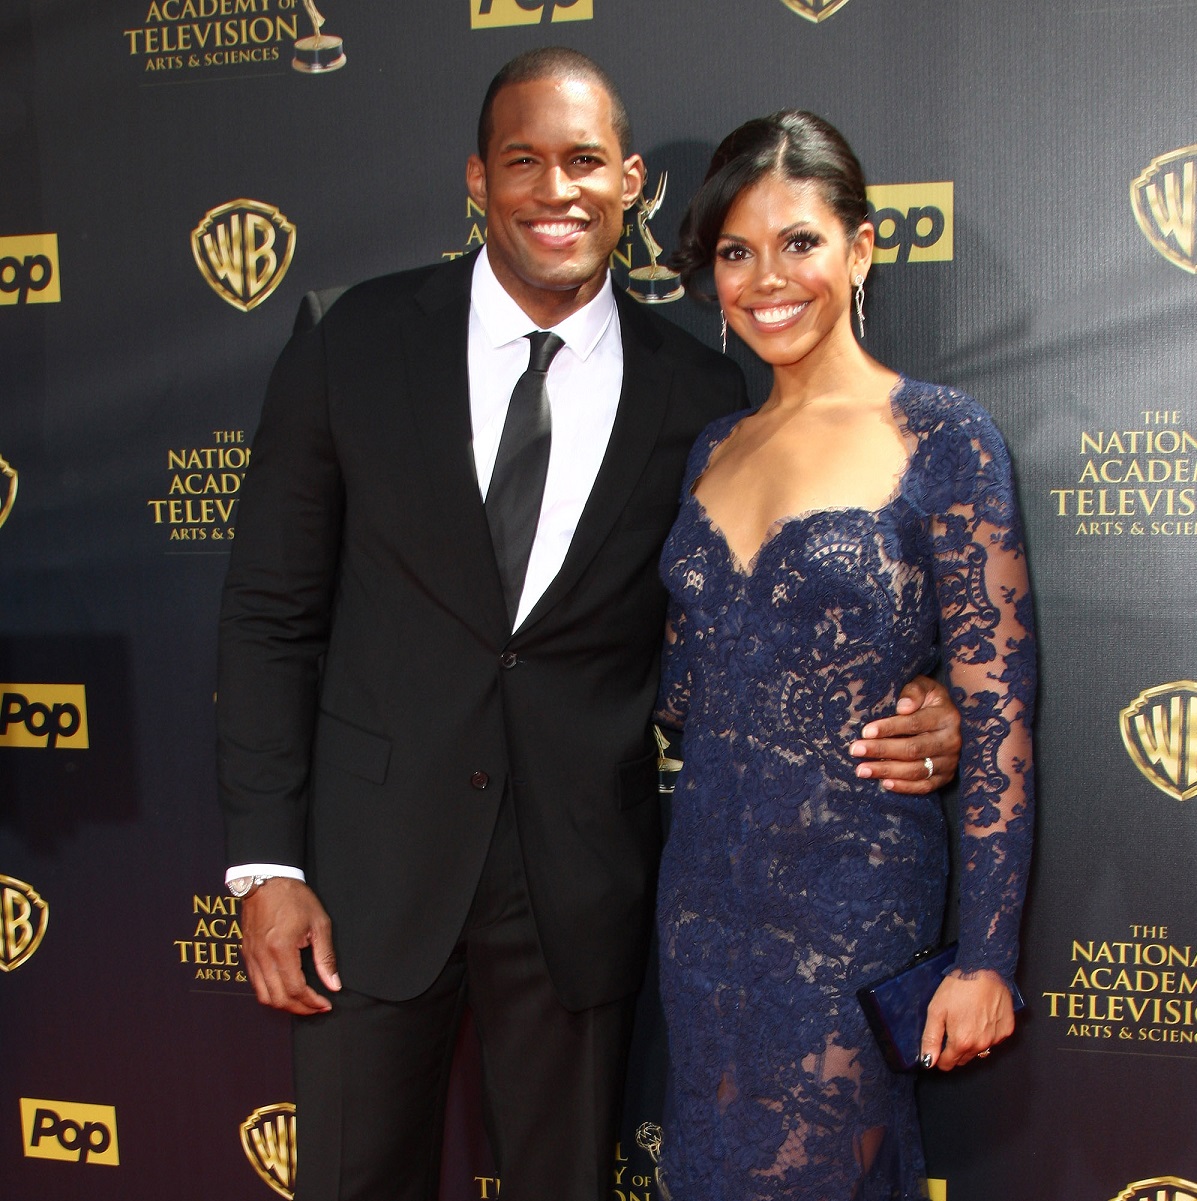 'The Bold and the Beautiful' star Lawrence Saint-Victor in a tuxedo and Karla Mosley in a blue dress; pose together for a photo.